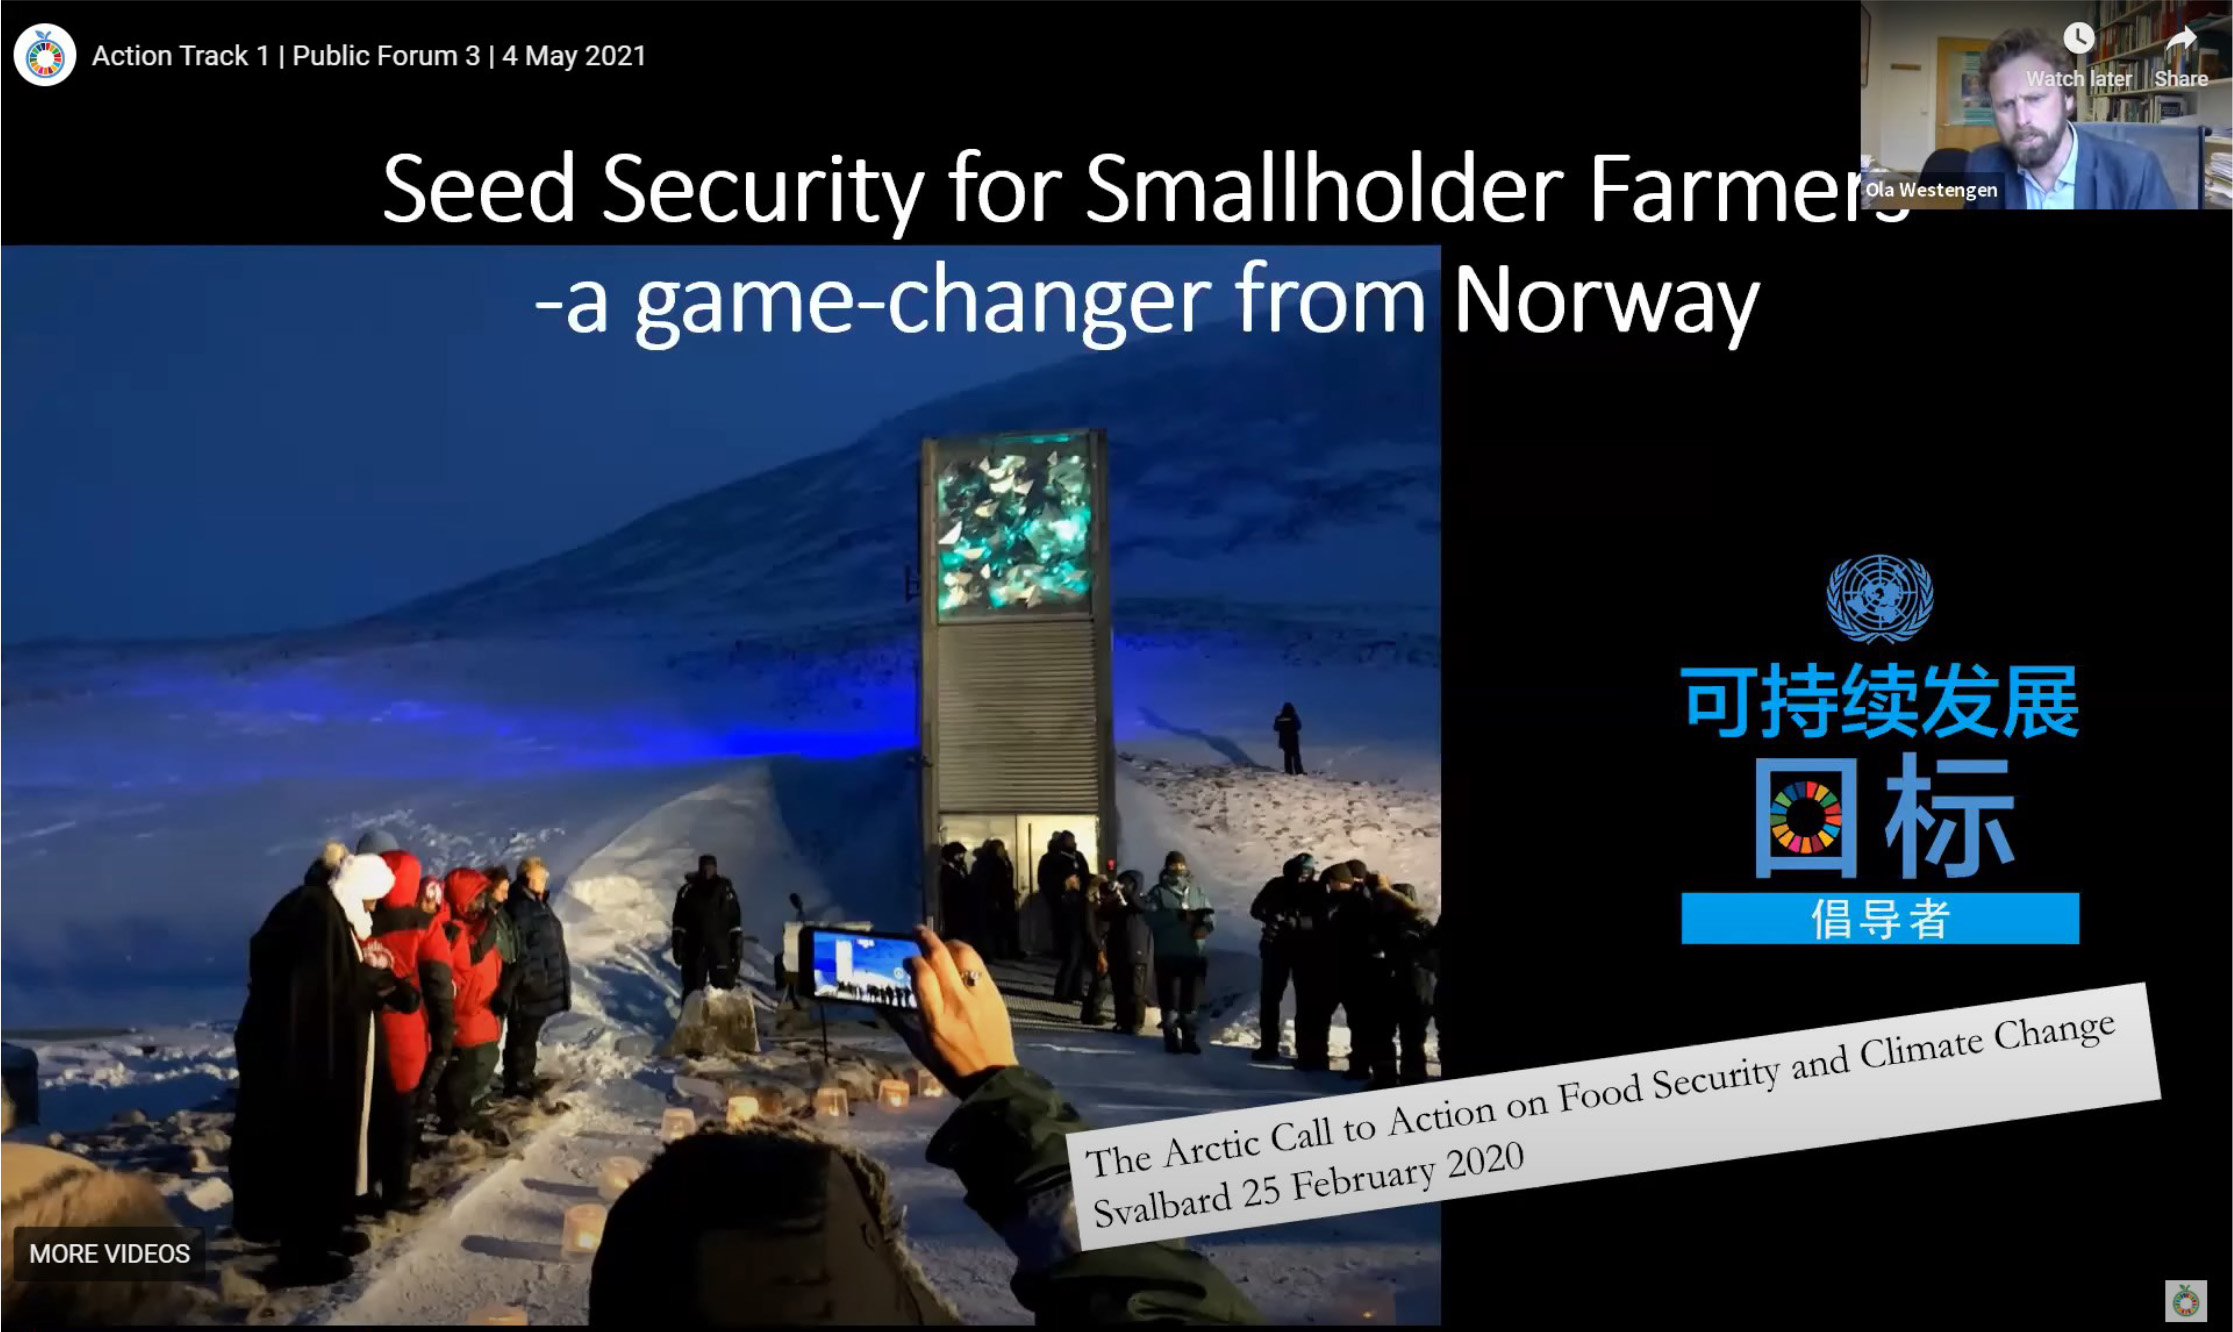 Seed security for smallholder farmers - a game-changer from Norway